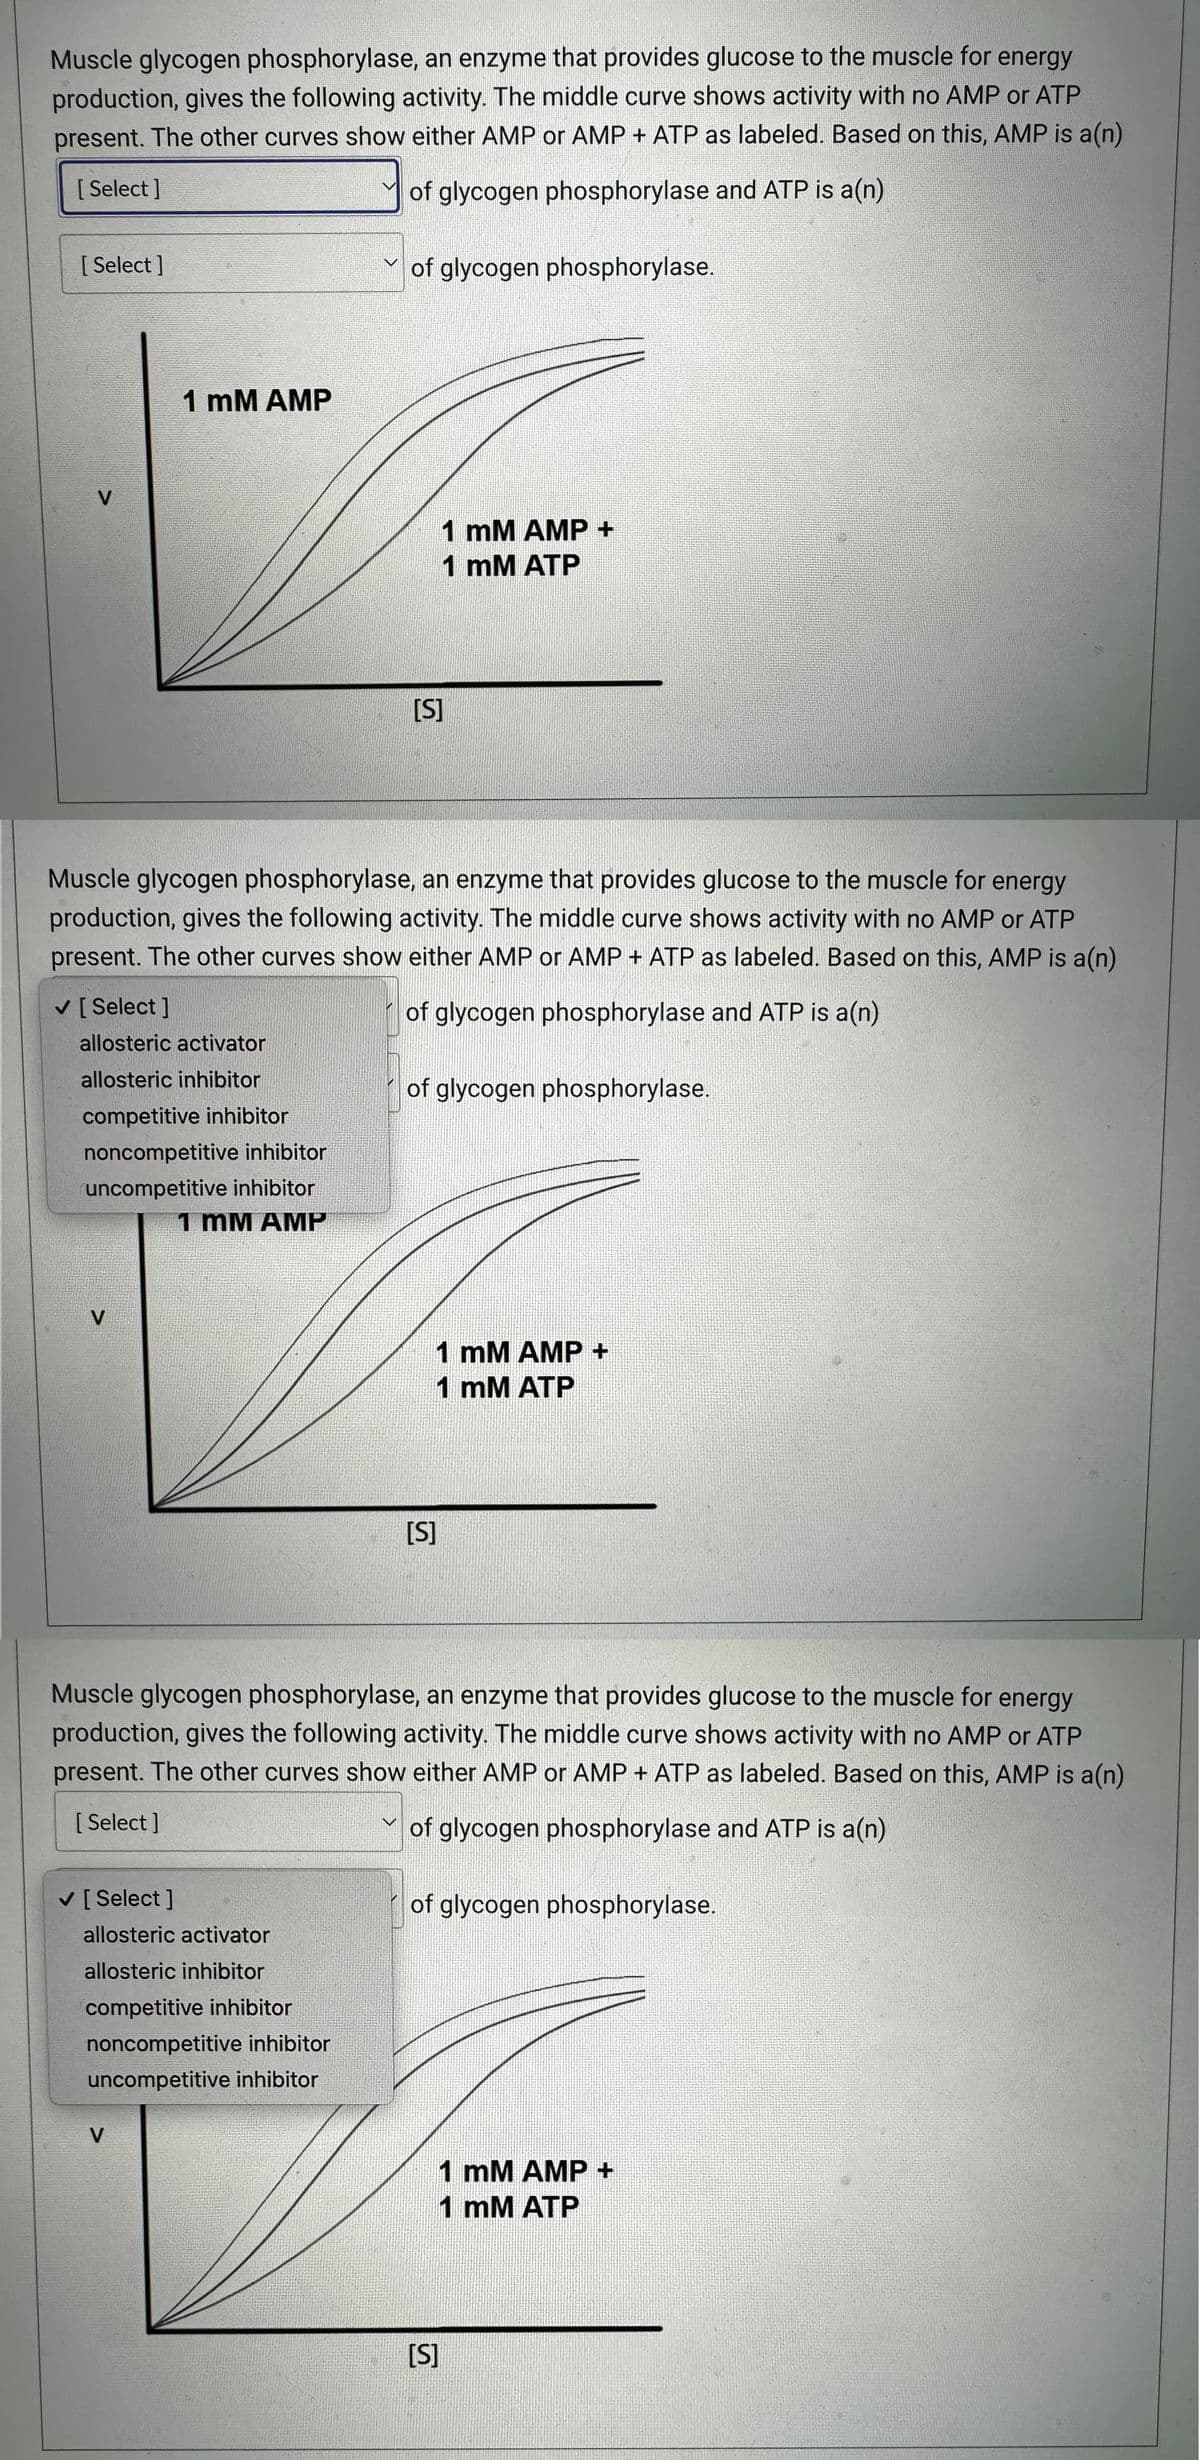 Muscle glycogen phosphorylase, an enzyme that provides glucose to the muscle for energy
production, gives the following activity. The middle curve shows activity with no AMP or ATP
present. The other curves show either AMP or AMP + ATP as labeled. Based on this, AMP is a(n)
[Select]
of glycogen phosphorylase and ATP is a(n)
[Select]
V
✓ [Select]
allosteric activator
allosteric inhibitor
competitive inhibitor
noncompetitive inhibitor
uncompetitive inhibitor
1 mM AMP
V
1 mM AMP
Muscle glycogen phosphorylase, an enzyme that provides glucose to the muscle for energy
production, gives the following activity. The middle curve shows activity with no AMP or ATP
present. The other curves show either AMP or AMP + ATP as labeled. Based on this, AMP is a(n)
of glycogen phosphorylase and ATP is a(n)
✓ [Select ]
of glycogen phosphorylase.
allosteric activator
allosteric inhibitor
competitive inhibitor
noncompetitive inhibitor
uncompetitive inhibitor
V
[S]
1 mM AMP +
1 mM ATP
of glycogen phosphorylase.
Muscle glycogen phosphorylase, an enzyme that provides glucose to the muscle for energy
production, gives the following activity. The middle curve shows activity with no AMP or ATP
present. The other curves show either AMP or AMP + ATP as labeled. Based on this, AMP is a(n)
[Select]
of glycogen phosphorylase and ATP is a(n)
1 mM AMP +
1 mM ATP
[S]
of glycogen phosphorylase.
[S]
1 mM AMP +
1 mM ATP